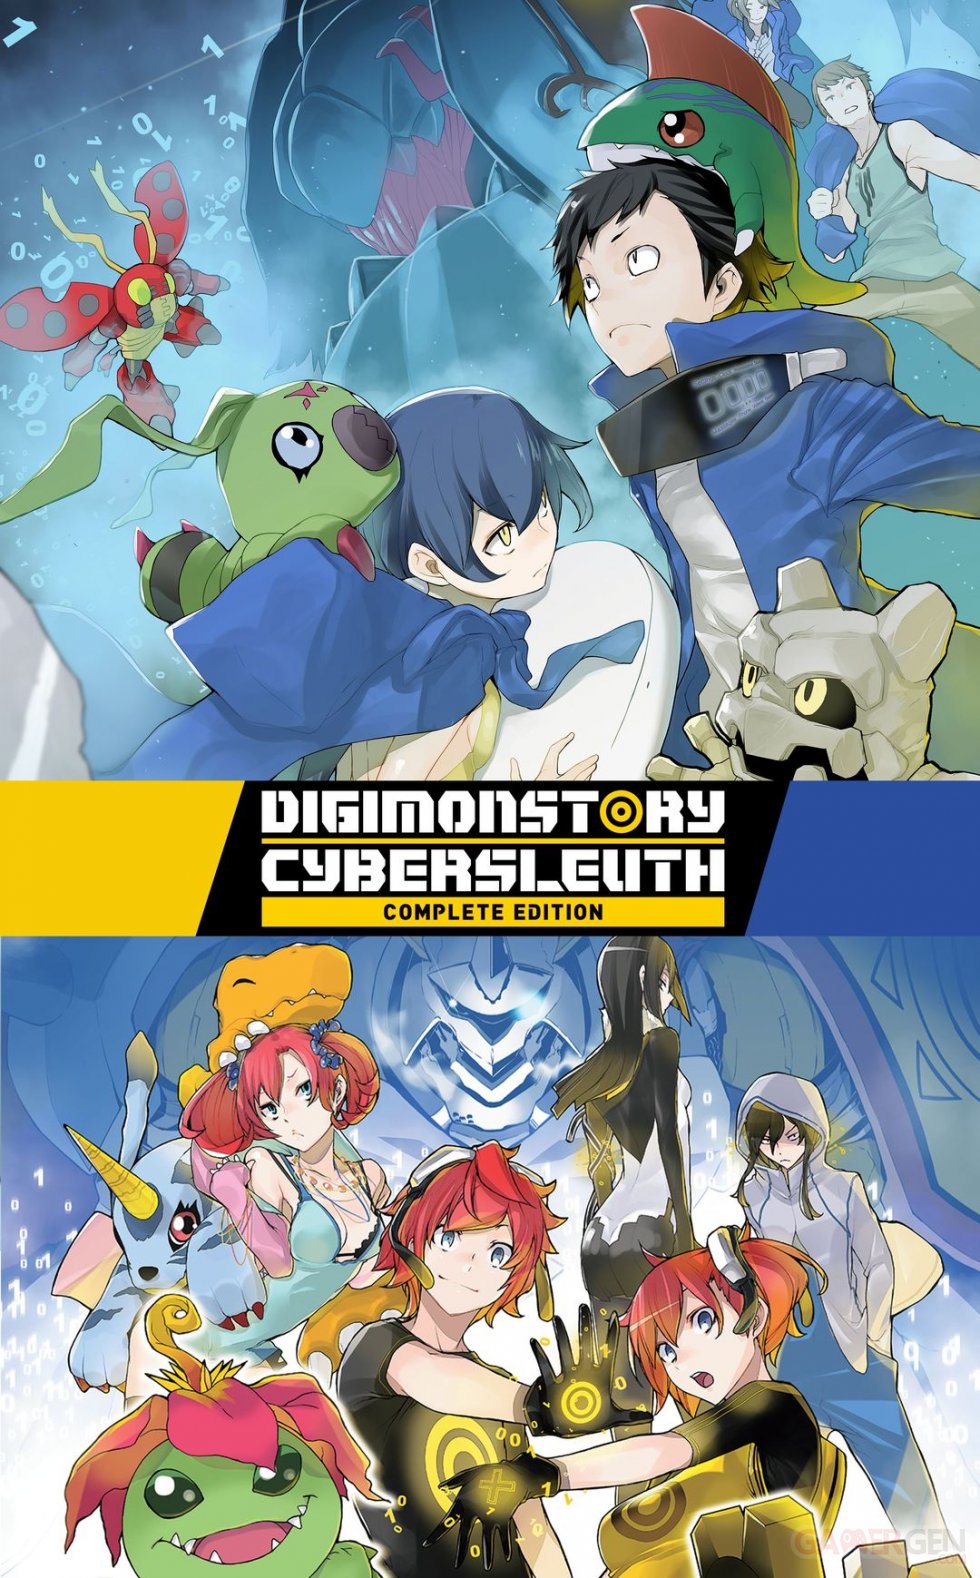 Digimon-Story-Cyber-Sleuth-Complete-Edition-07-08-07-2019